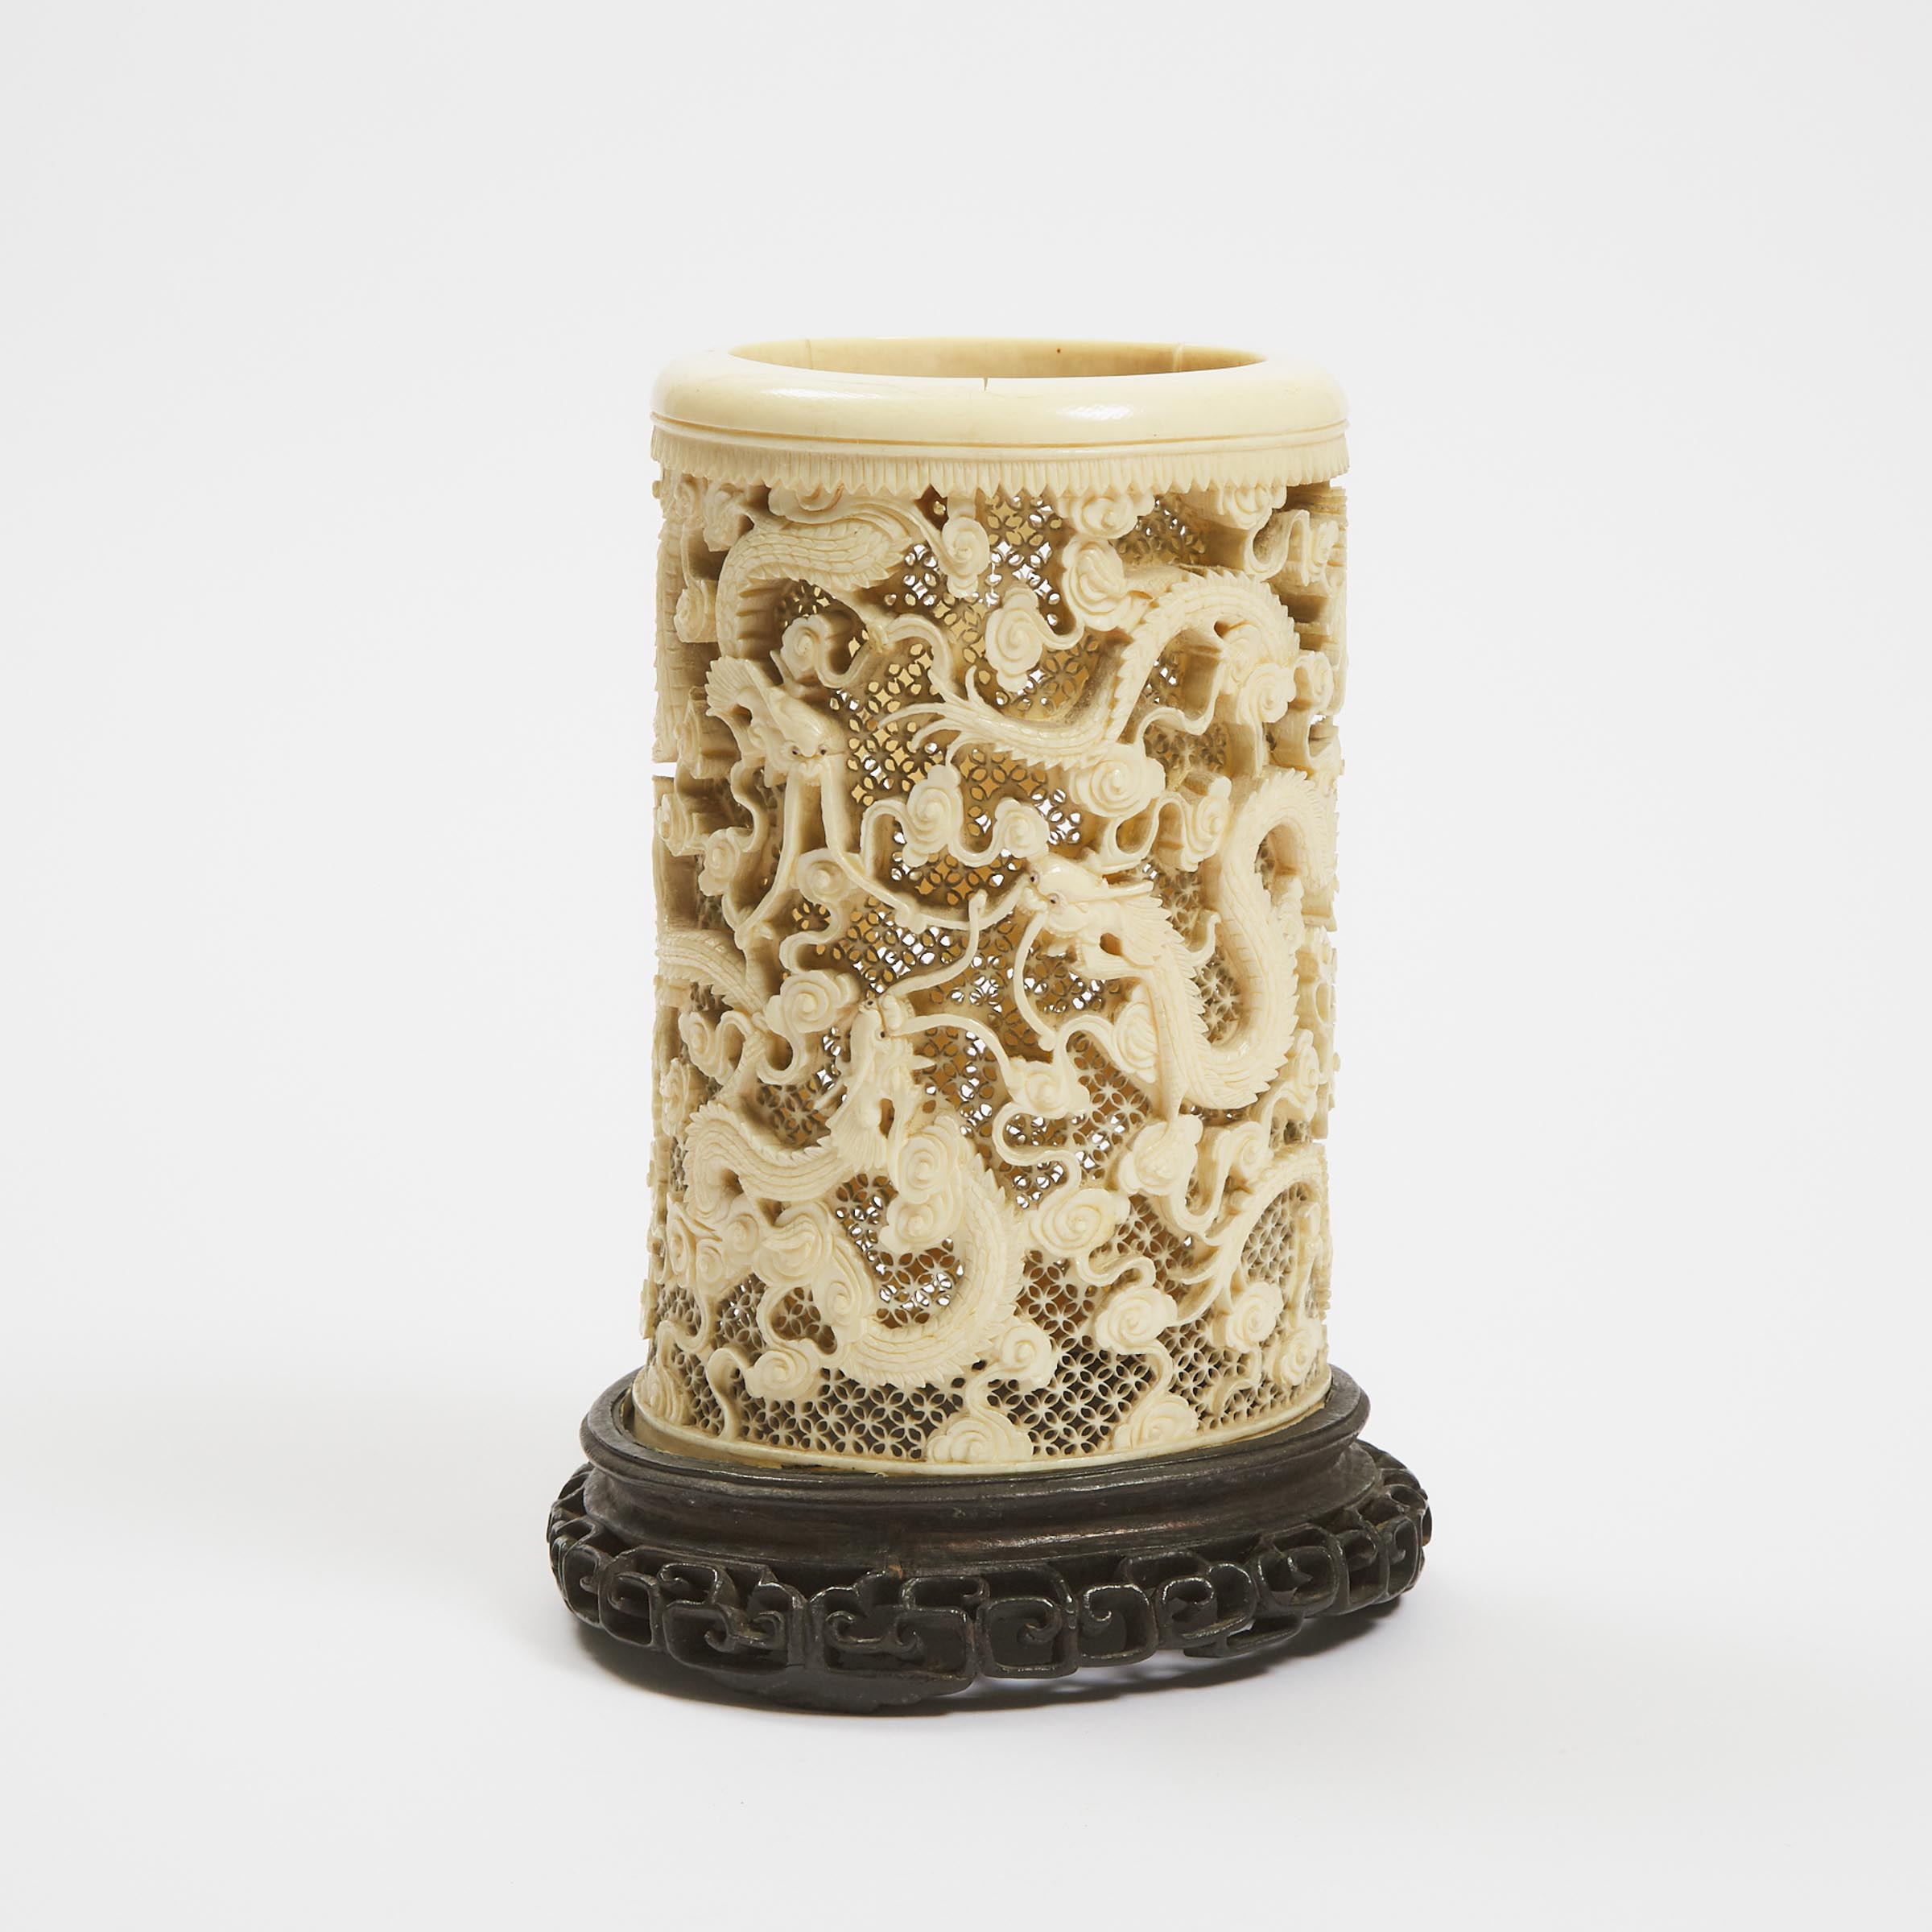 A Large Reticulated Ivory Brush Pot, Late Qing Dynasty